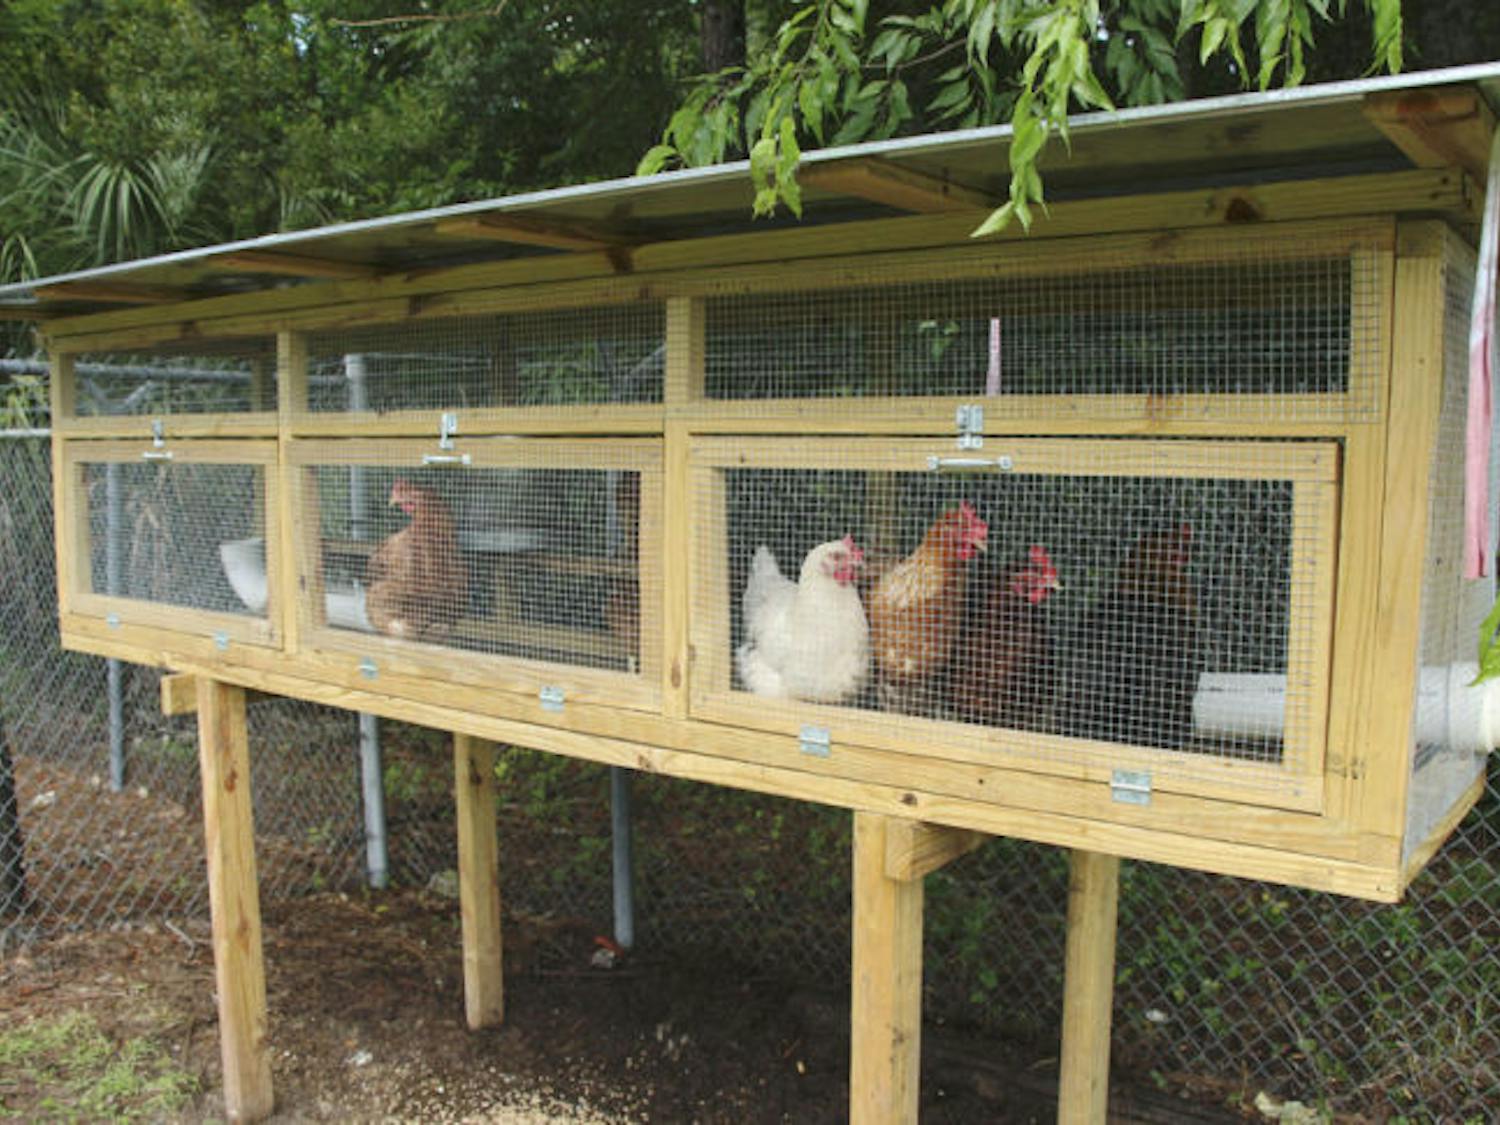 Sentinel chickens are caged on Gainesville Mosquito Control property. They are used to monitor the spread of viruses like Eastern equine encephalitis.